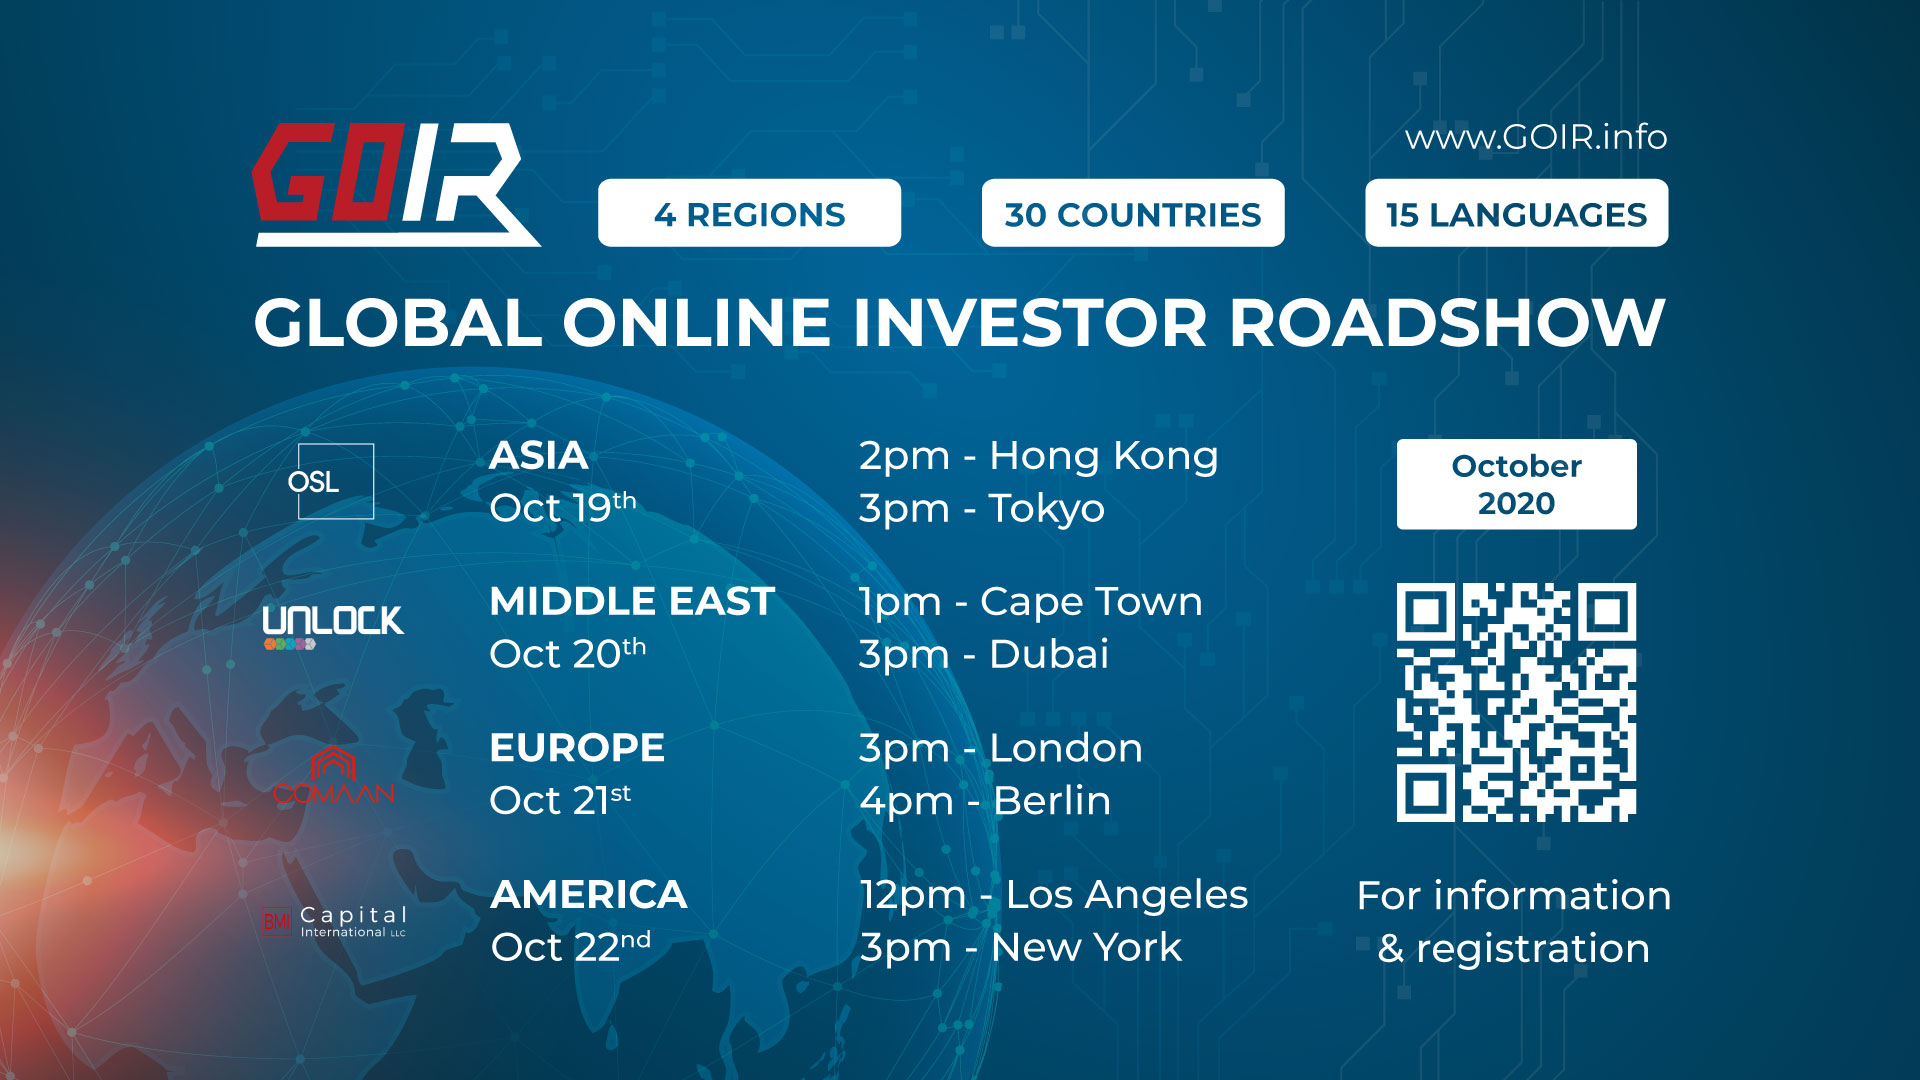 Global Online Investor Roadshow – October 2020 organized by Coinstreet Partners